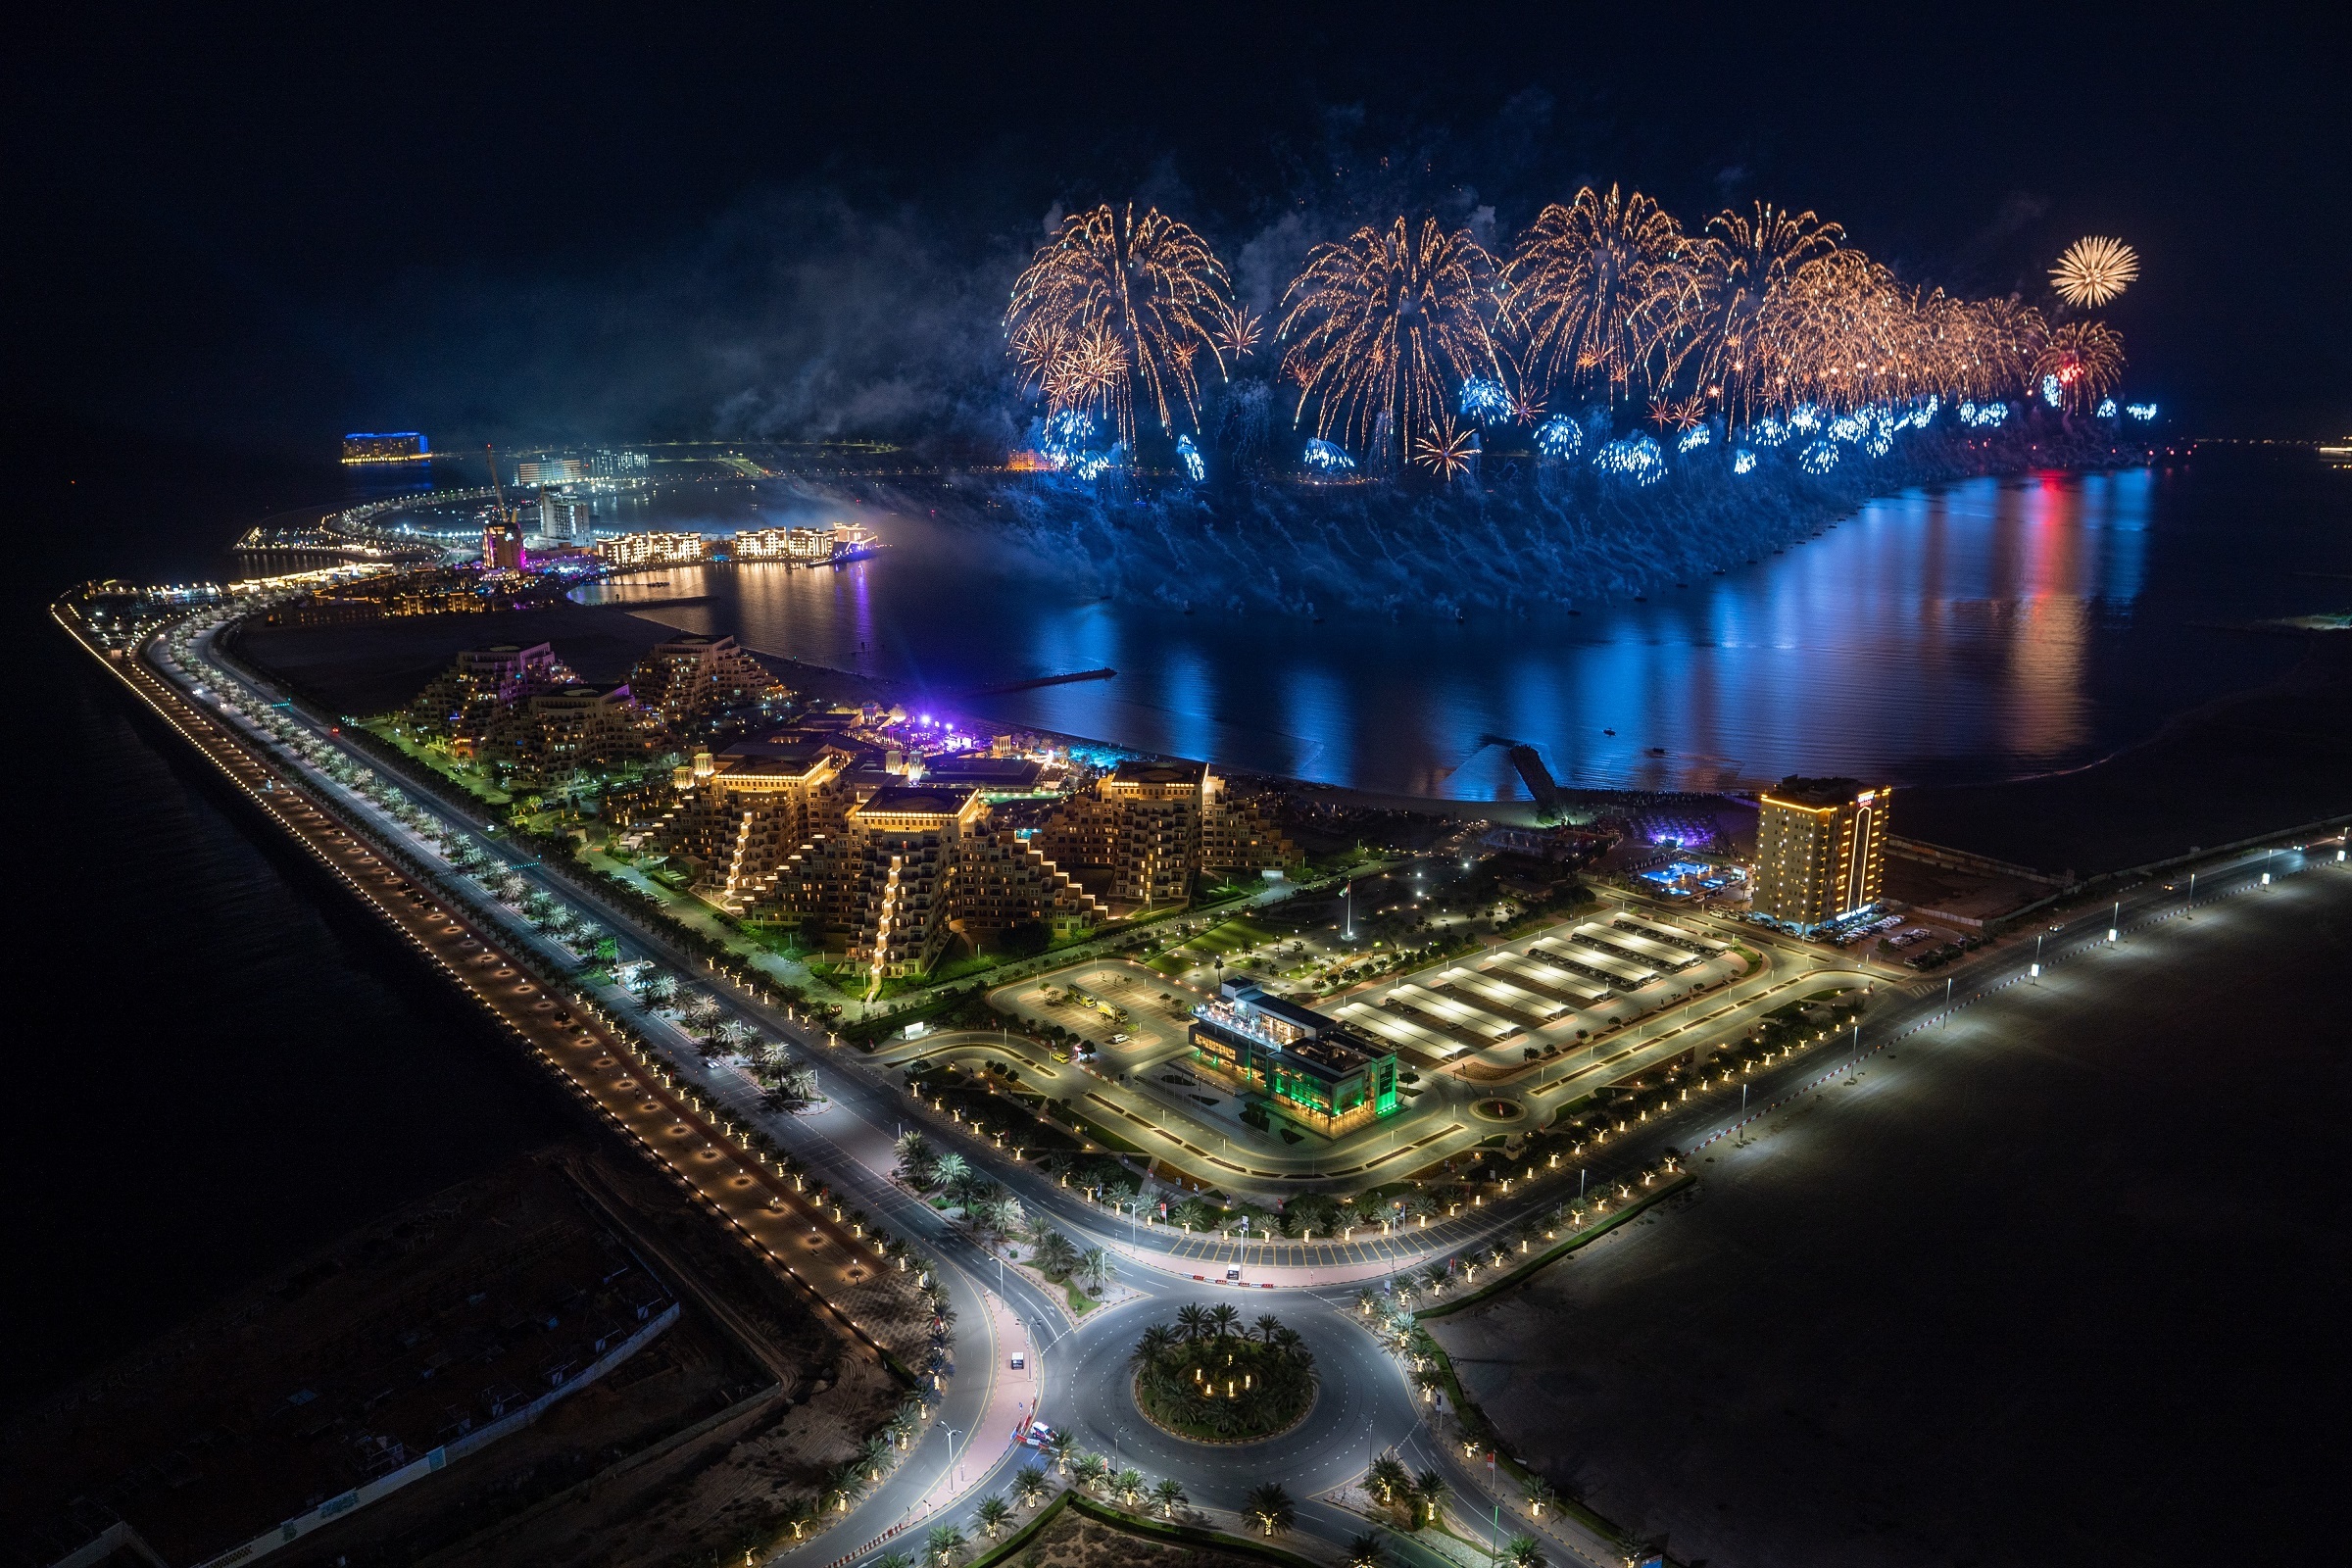 Ras Al Khaimah ushers in 2021 with one of the world's largest fireworks displays inspiring hope and confidence